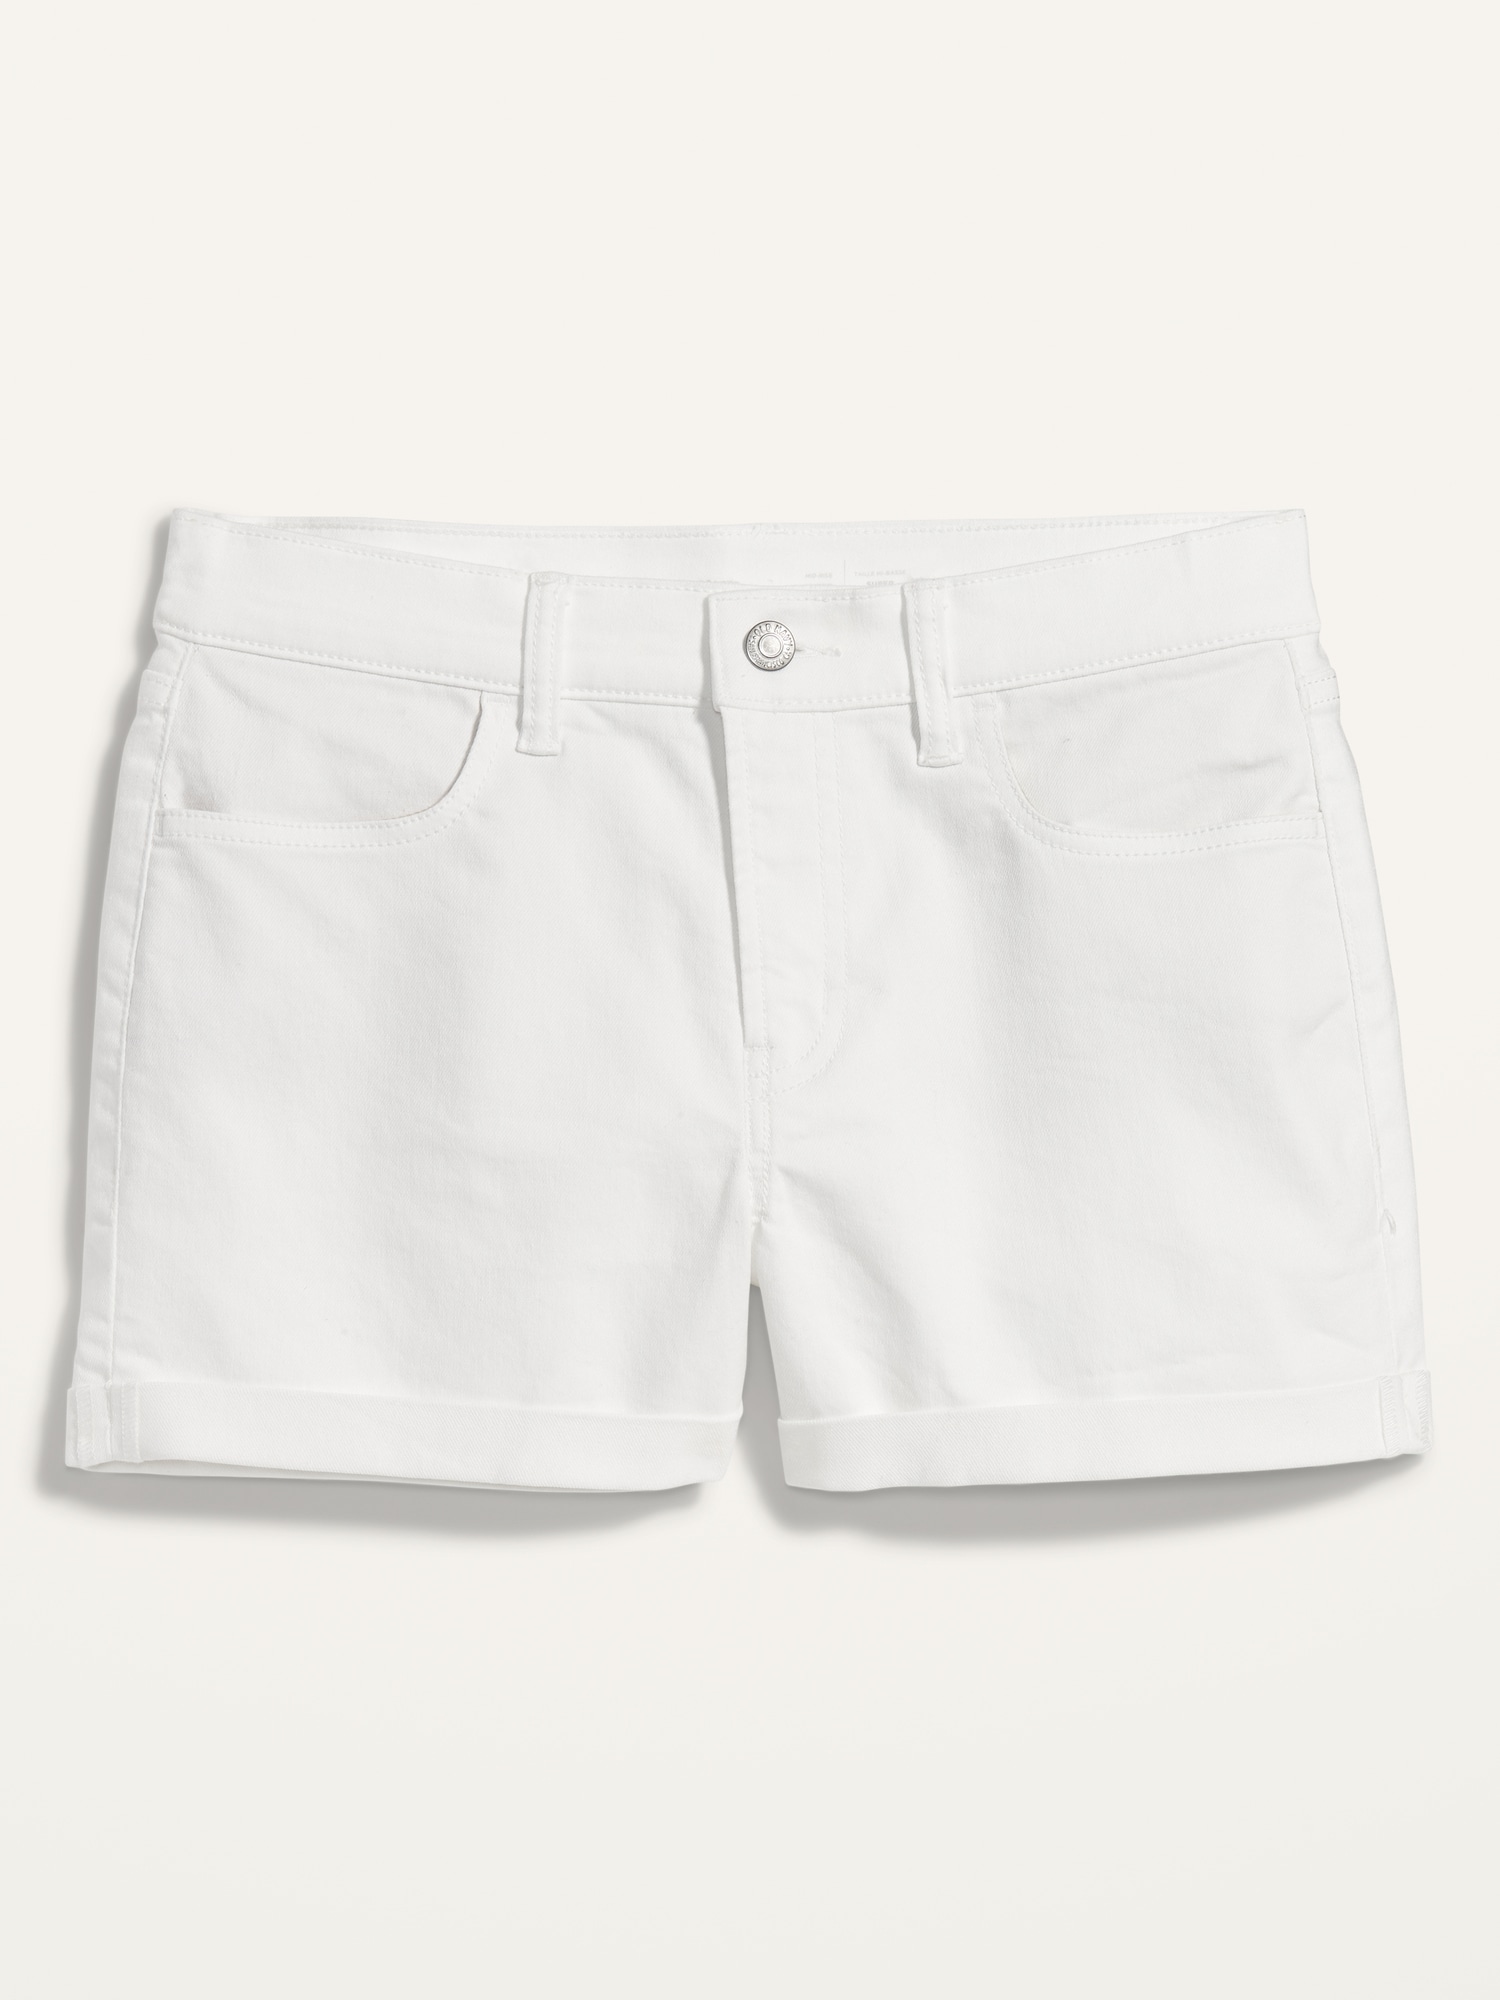 Mid-Rise Wow White Jean Shorts -- 3-inch inseam | Old Navy